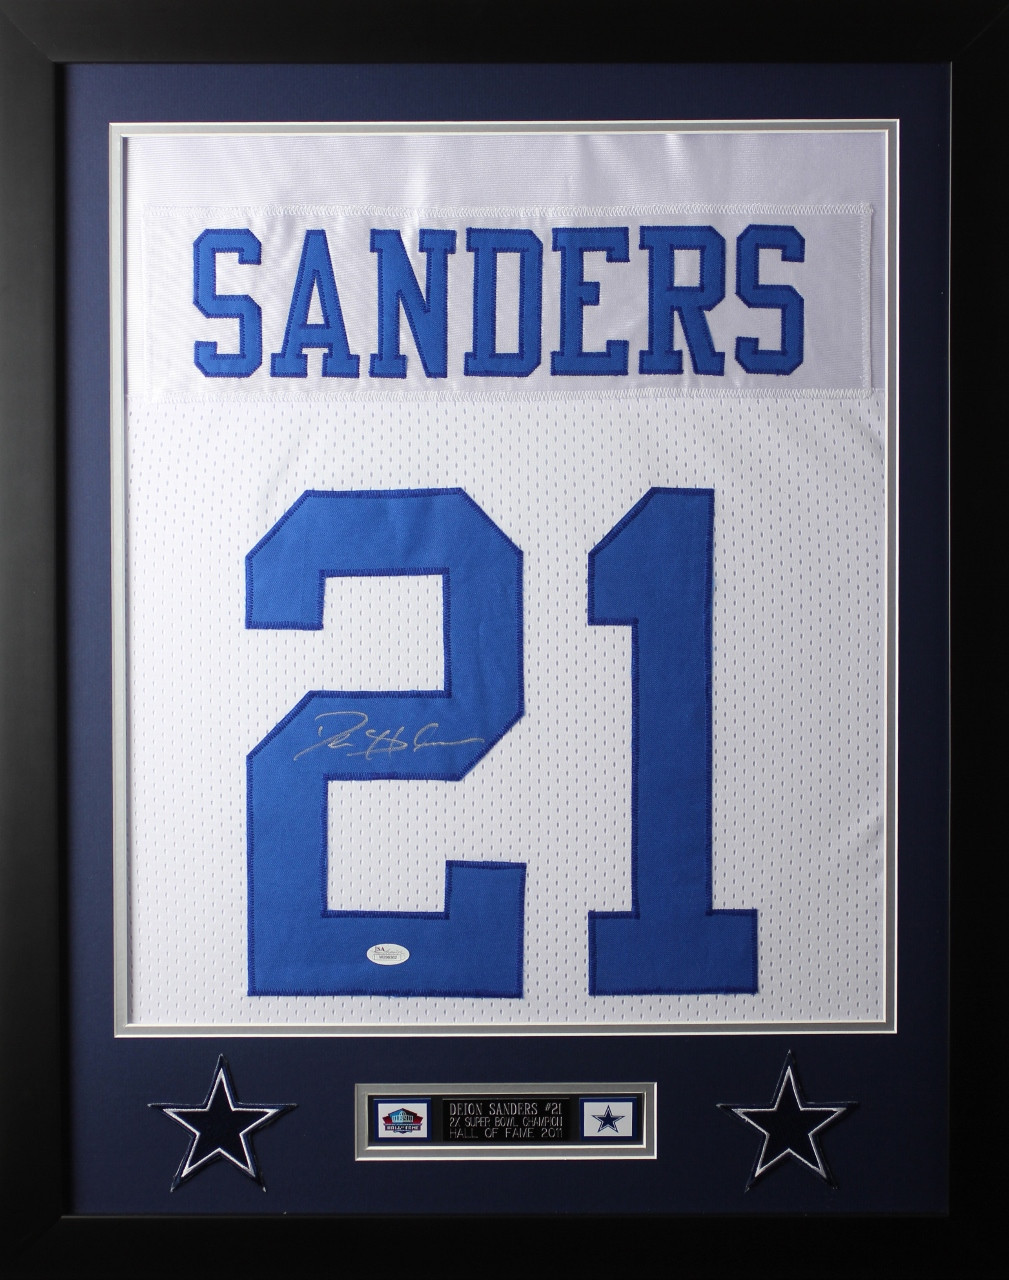 Deion Sanders Framed and Autographed White Cowboys Jersey (24x30)